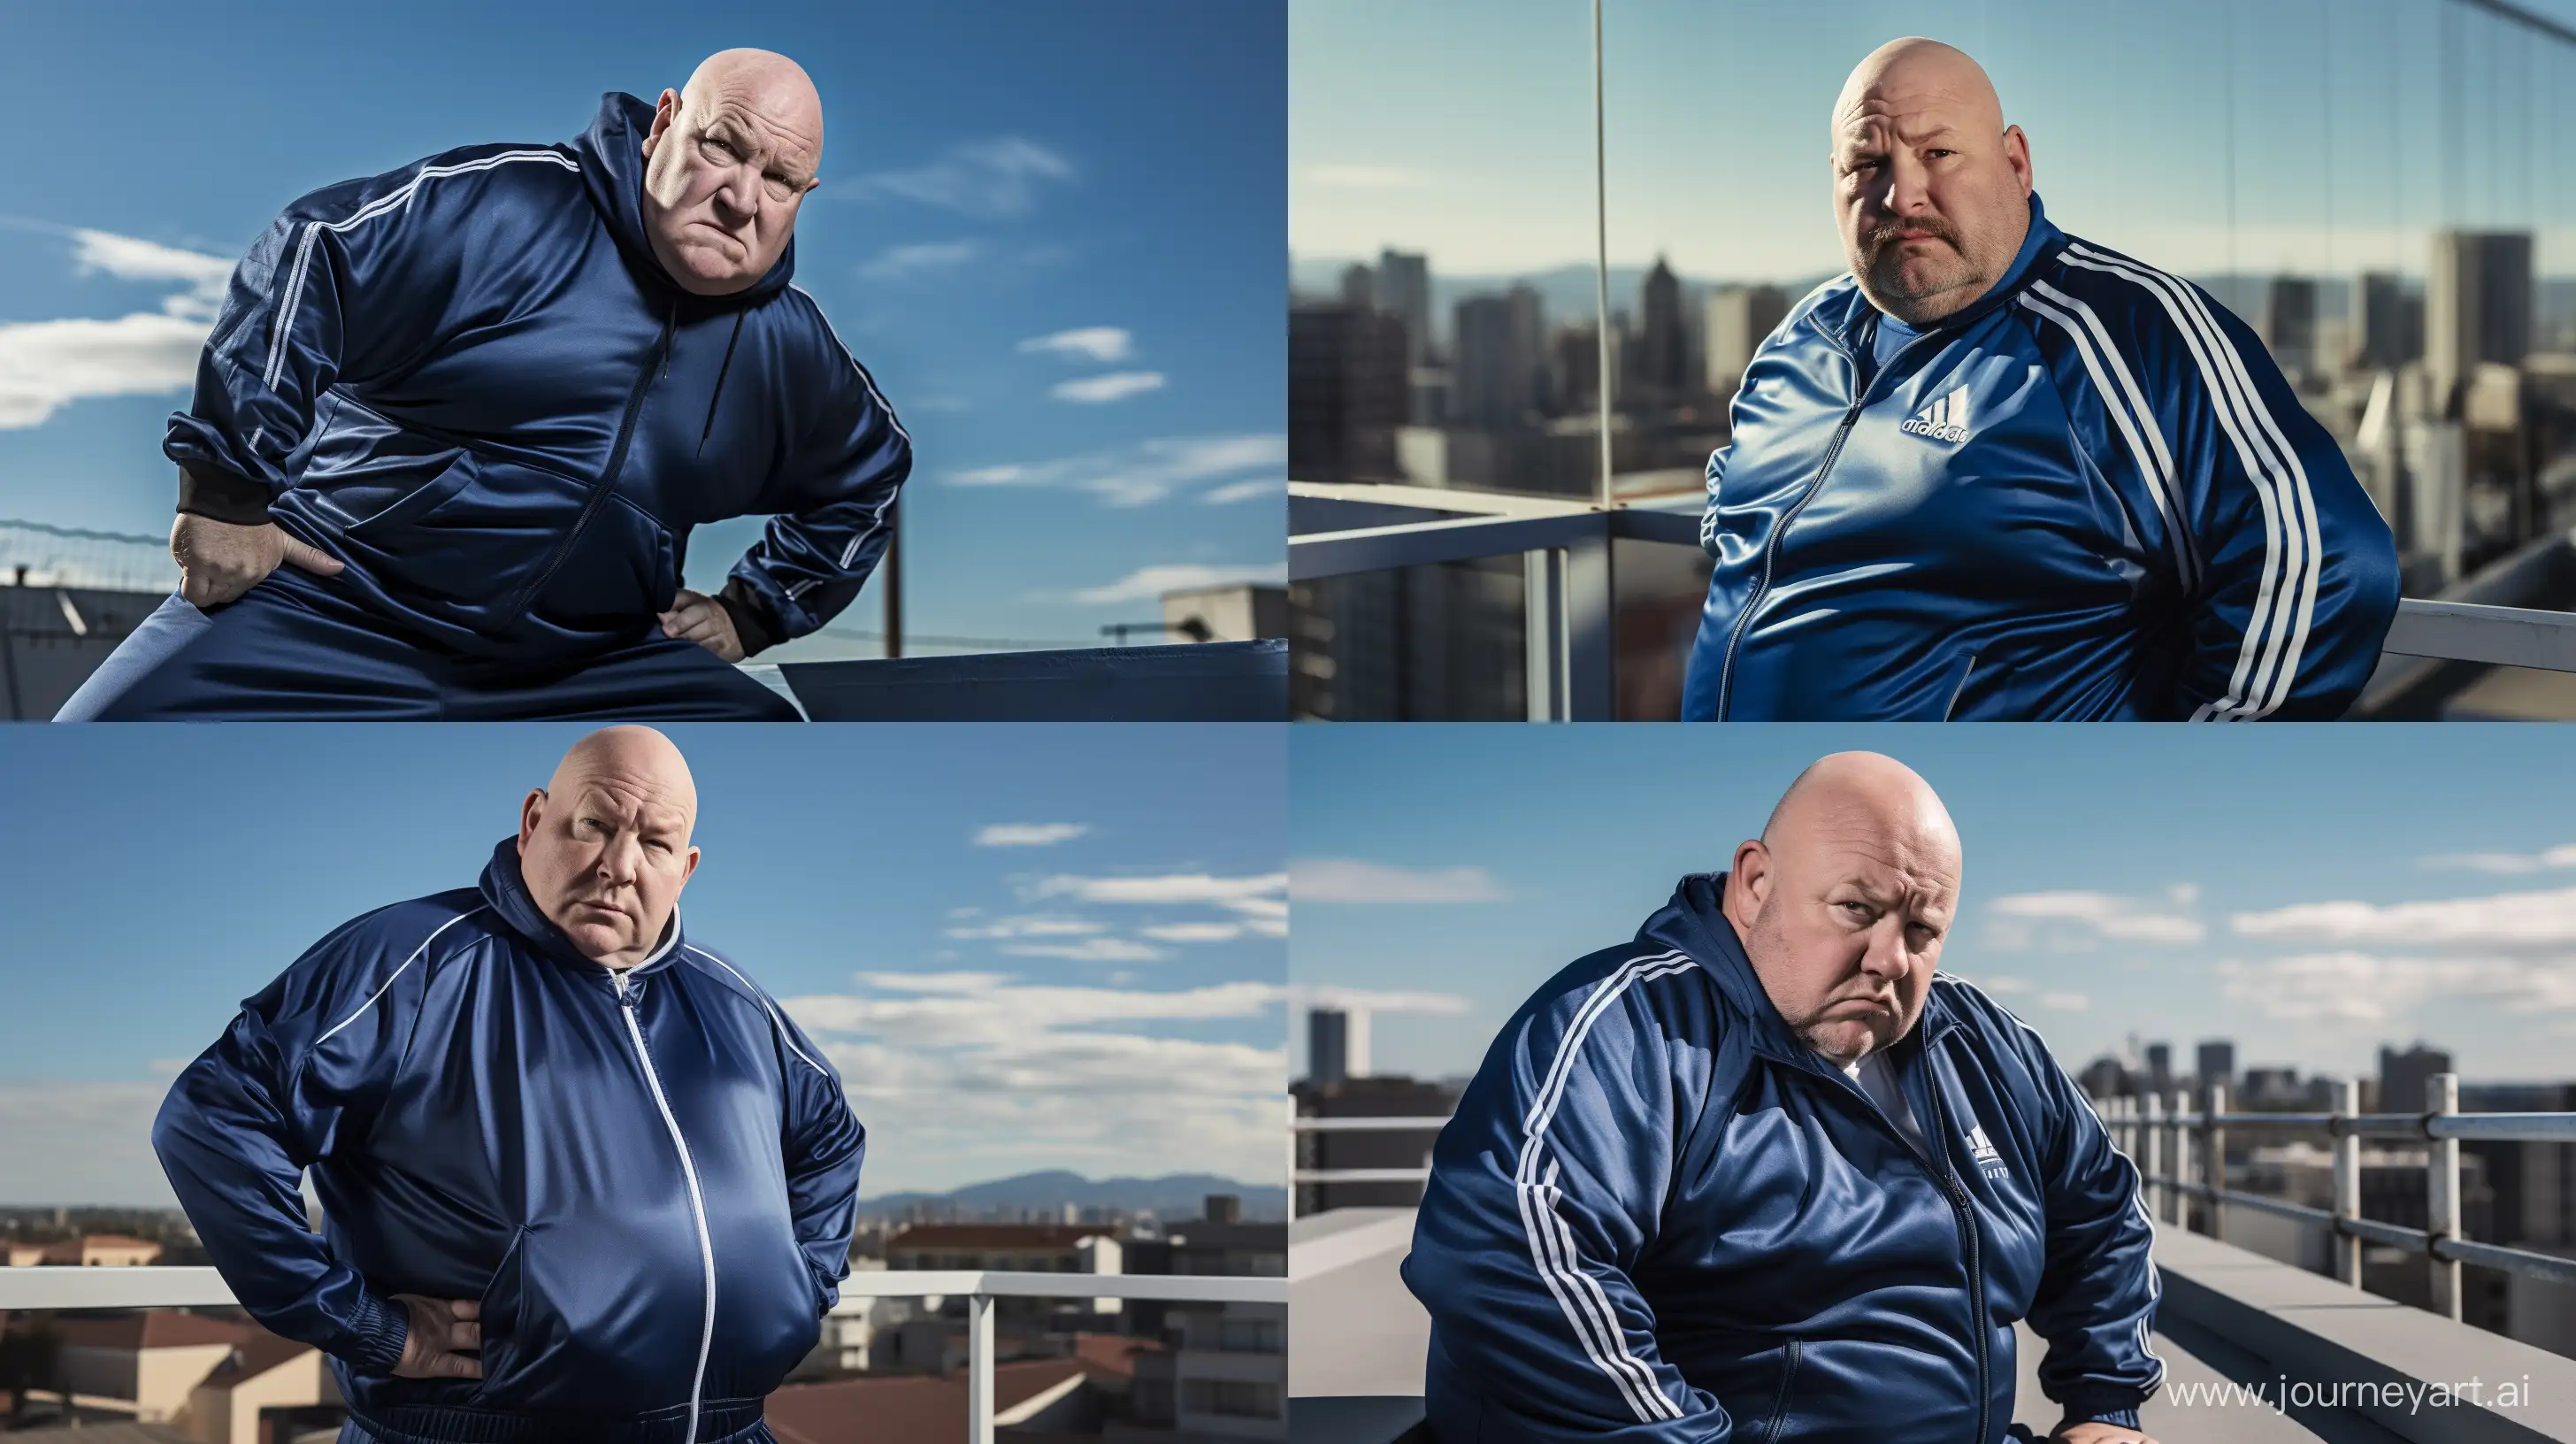 Elderly-Man-in-Shiny-Navy-Tracksuit-on-Rooftop